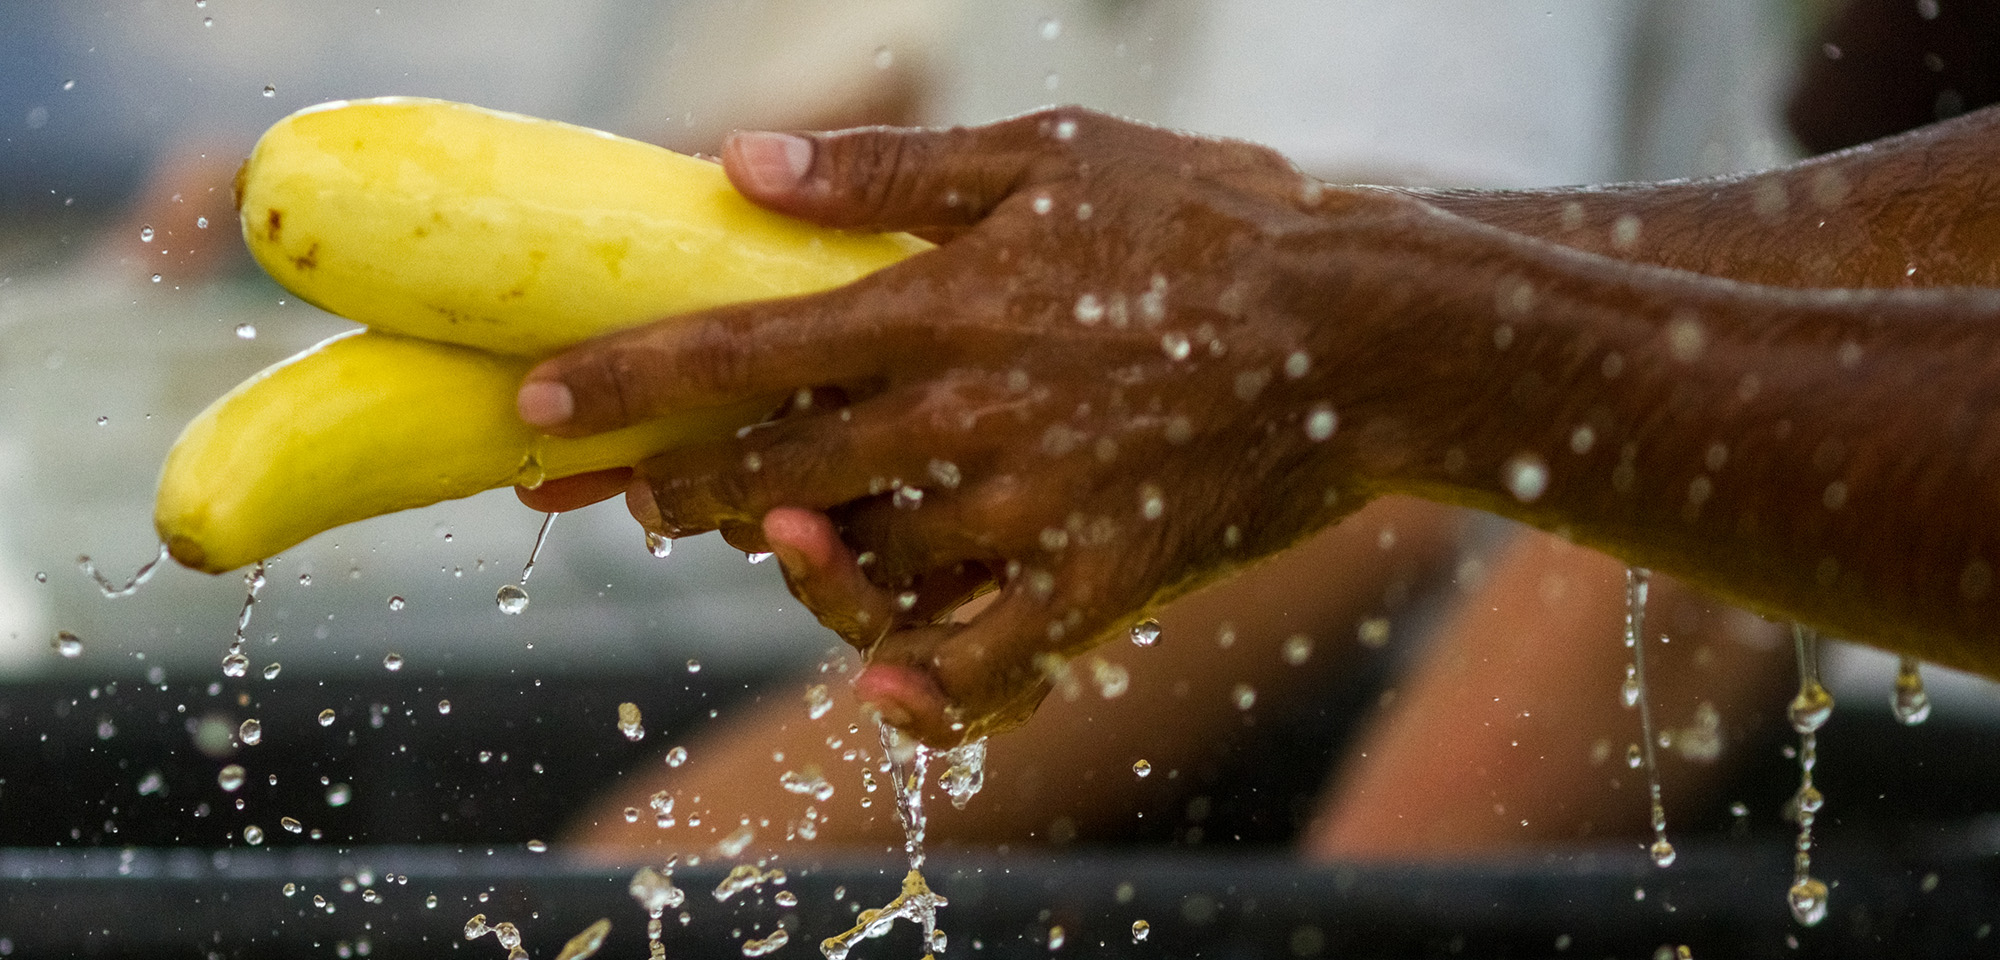 A pair of hands washing a yellow vegetable in running water